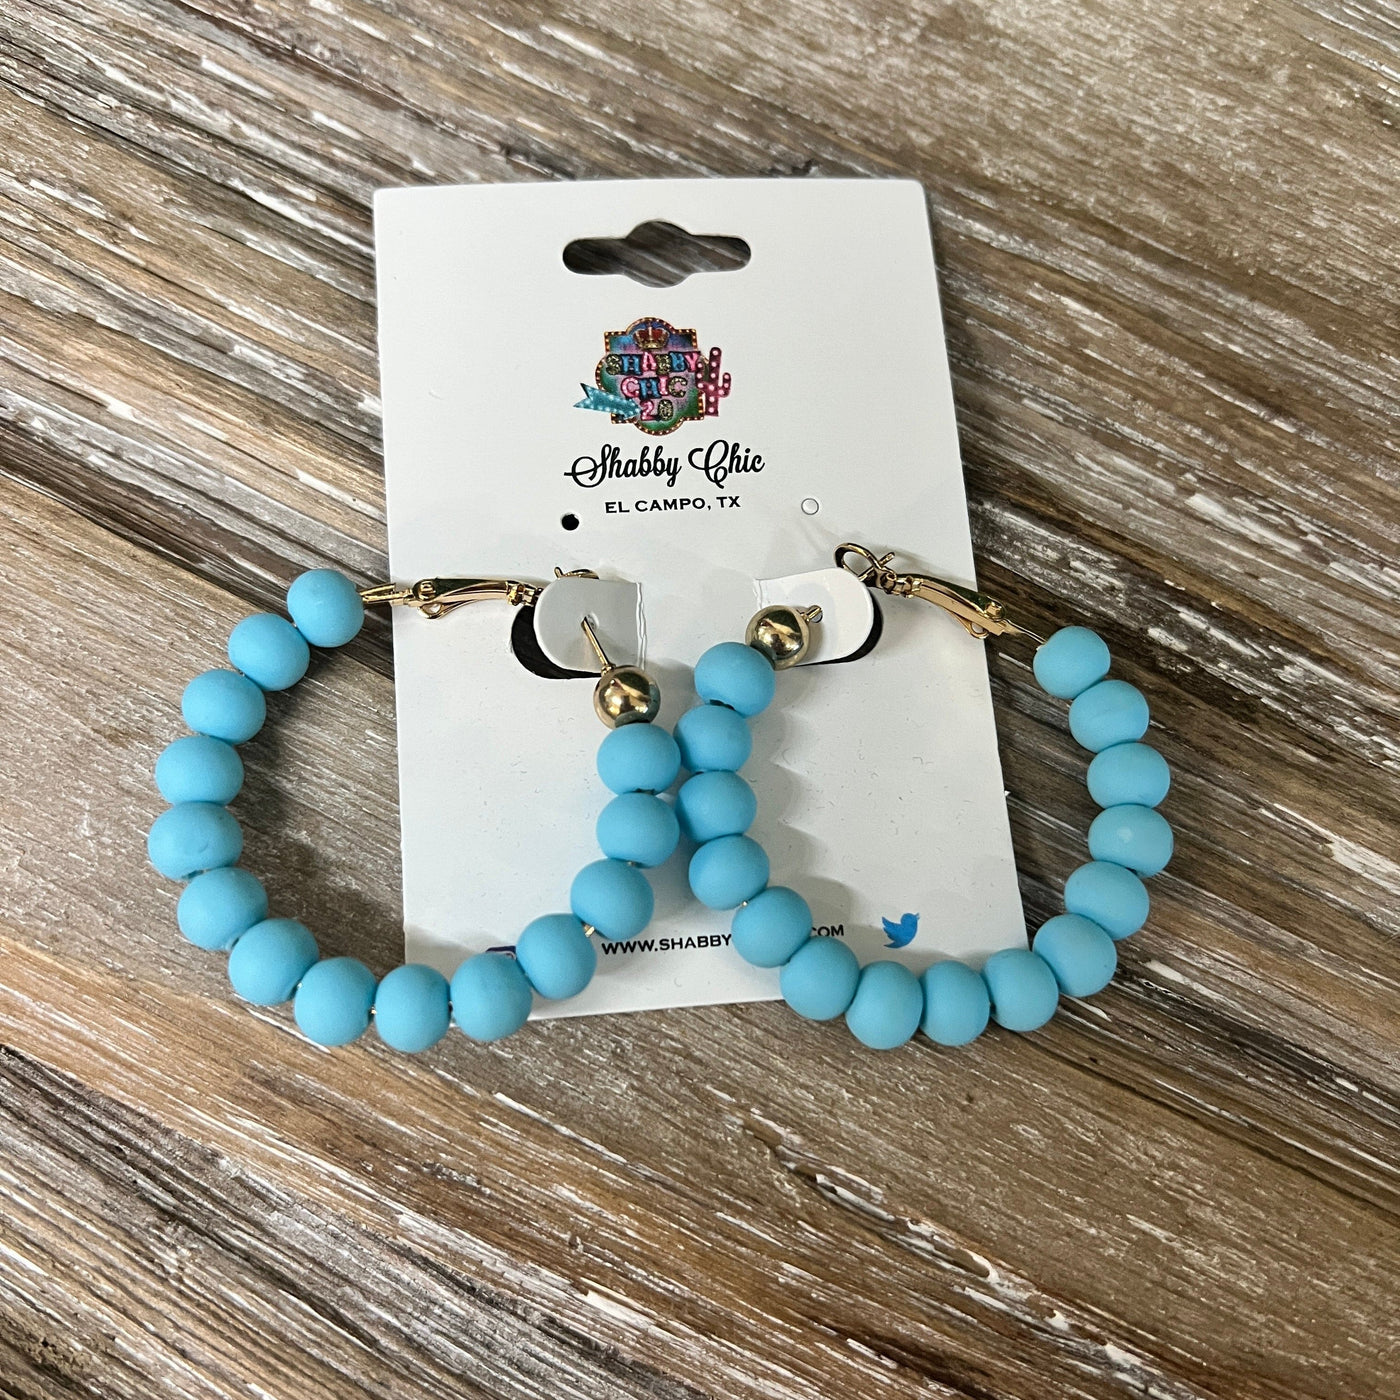 Clay Beaded Hoops - Baby Blue Shabby Chic Boutique and Tanning Salon